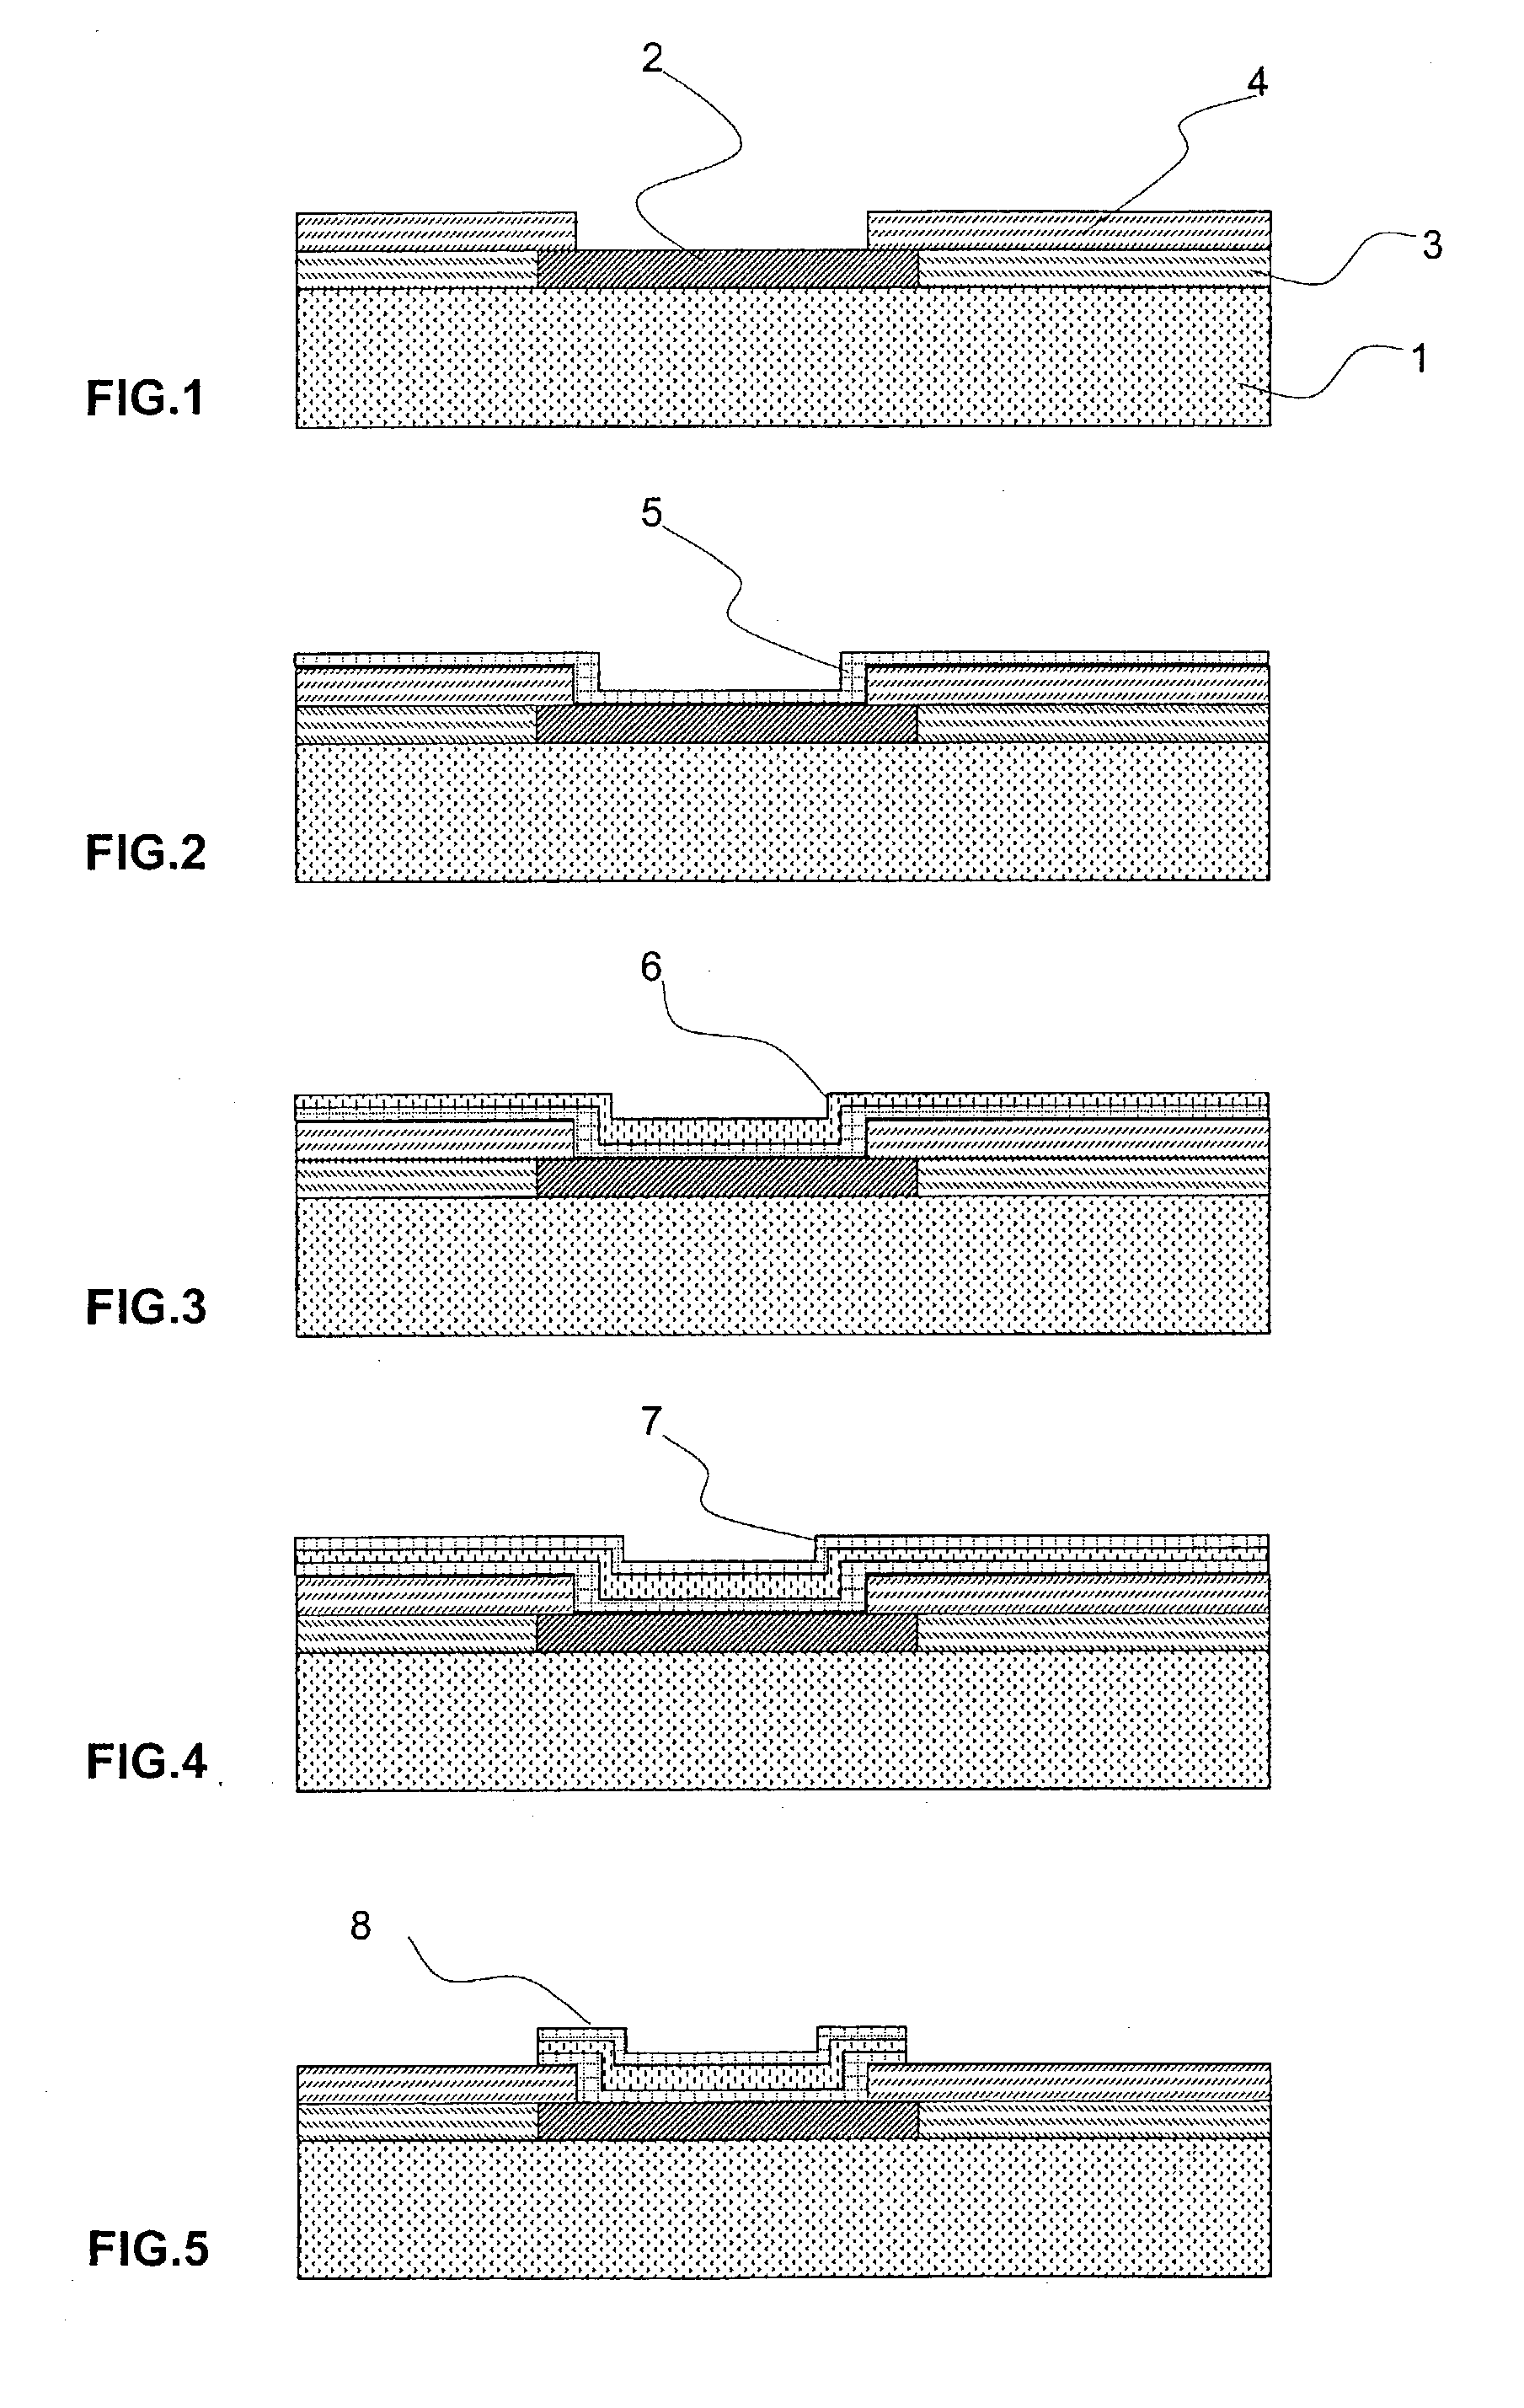 Electronic component incorporating an integrated circuit and planar microcapacitor